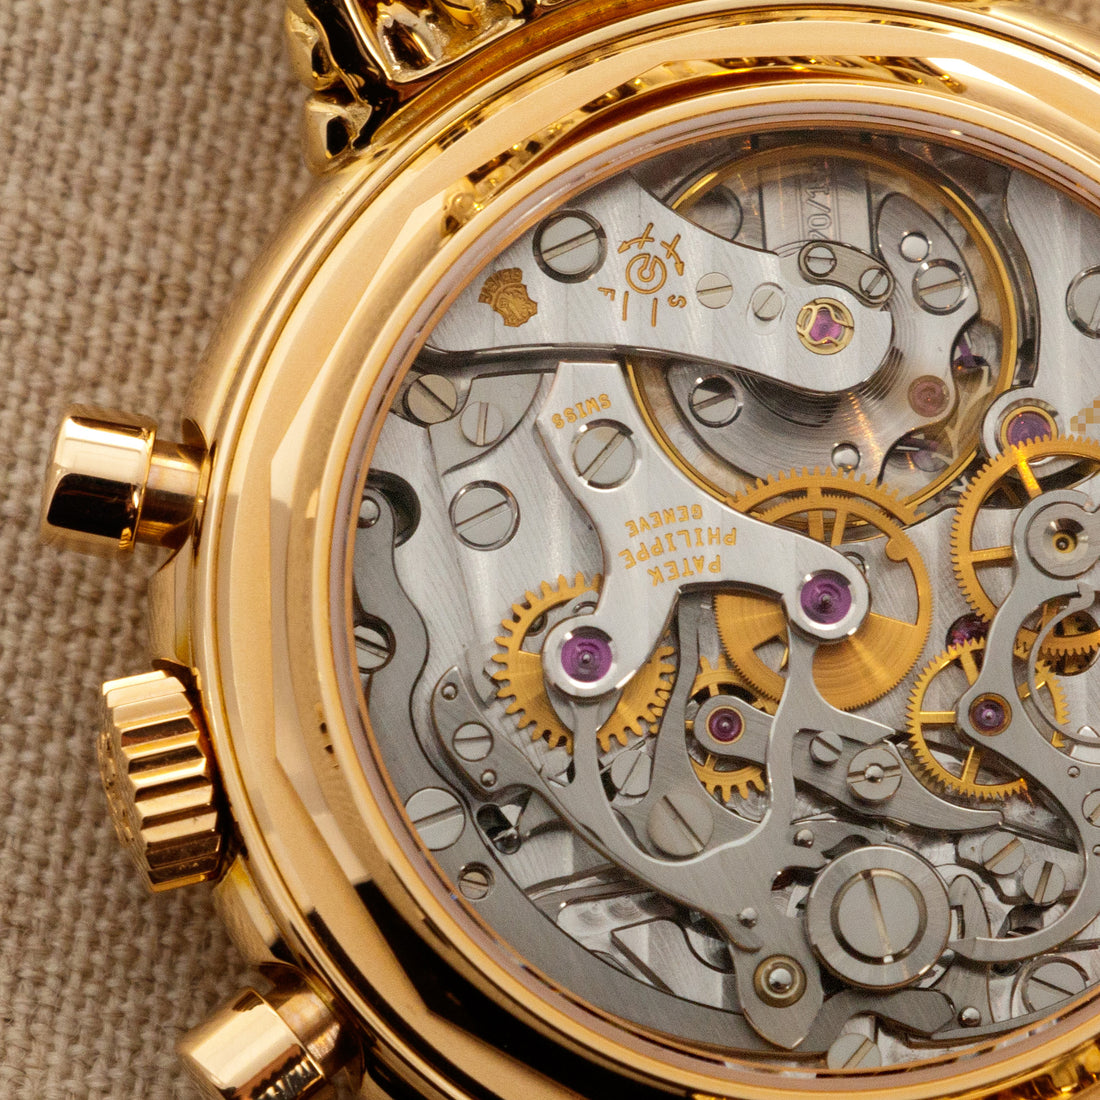 Patek Philippe Rose Gold Perpetual Calendar Watch Ref. 3970 with Rare Brown, Breguet Numeral Dial